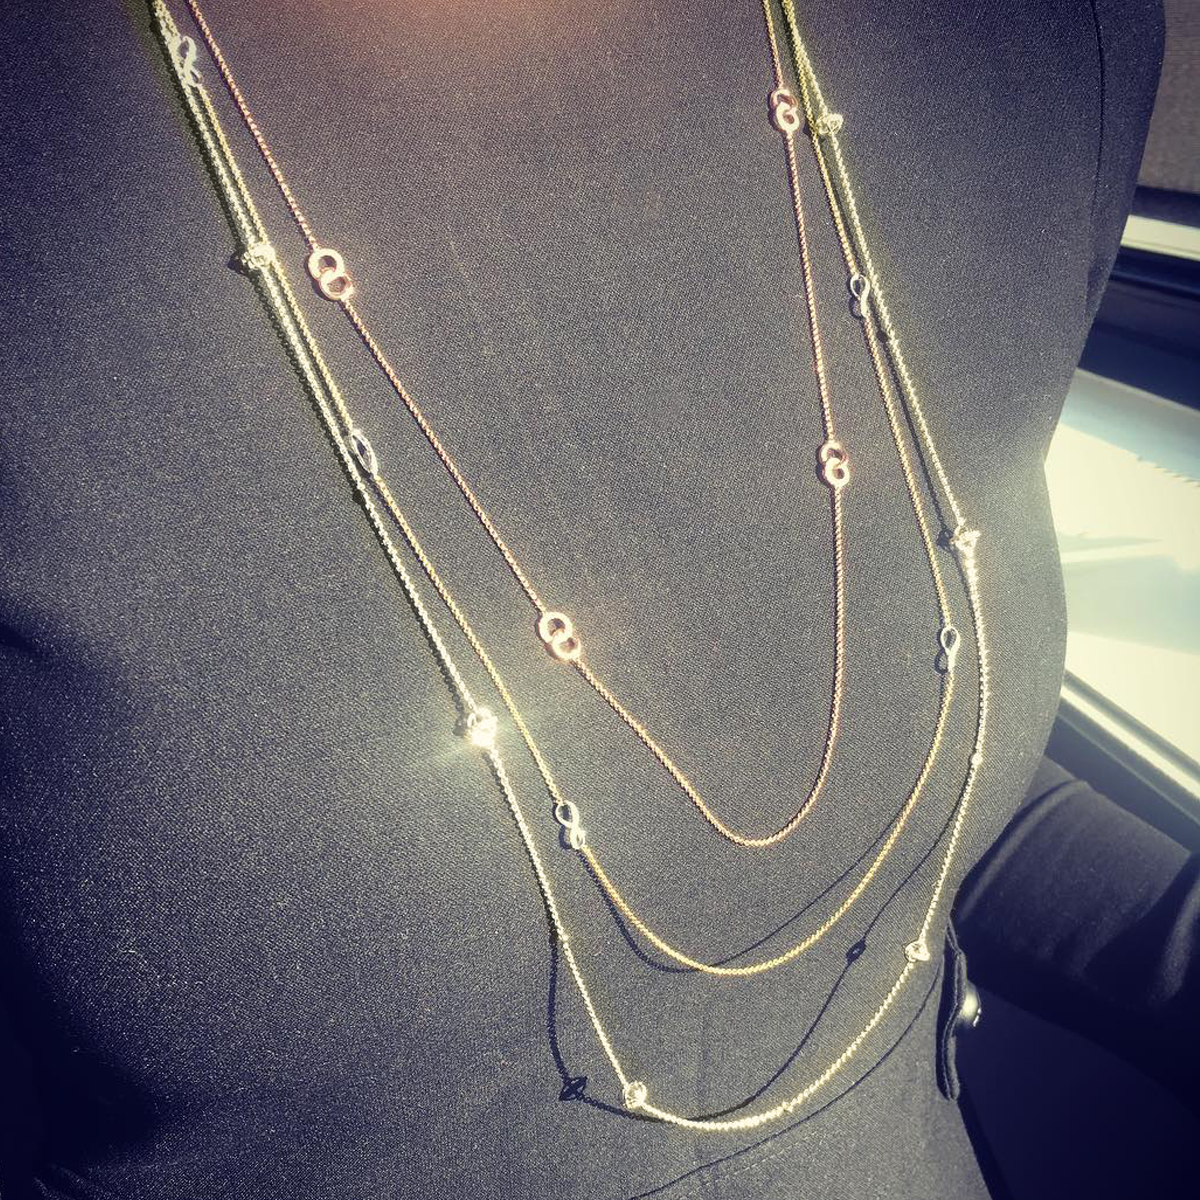 thin chain necklace with diamond